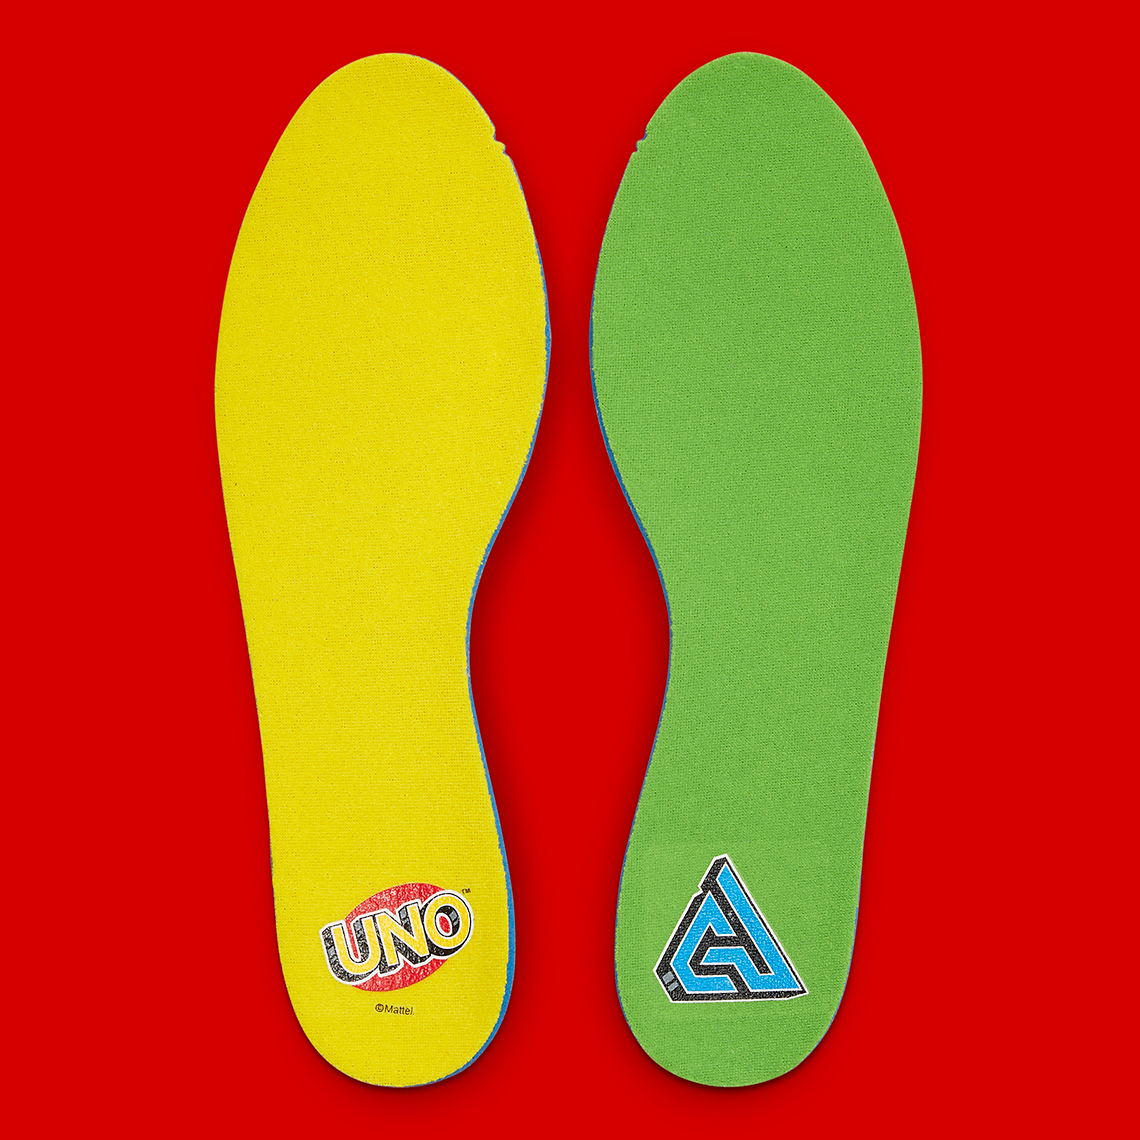 Nike Sportswear will be expanding their women's lineup with an exclusive iteration Uno Deck Dc9363 001 Release Date 7